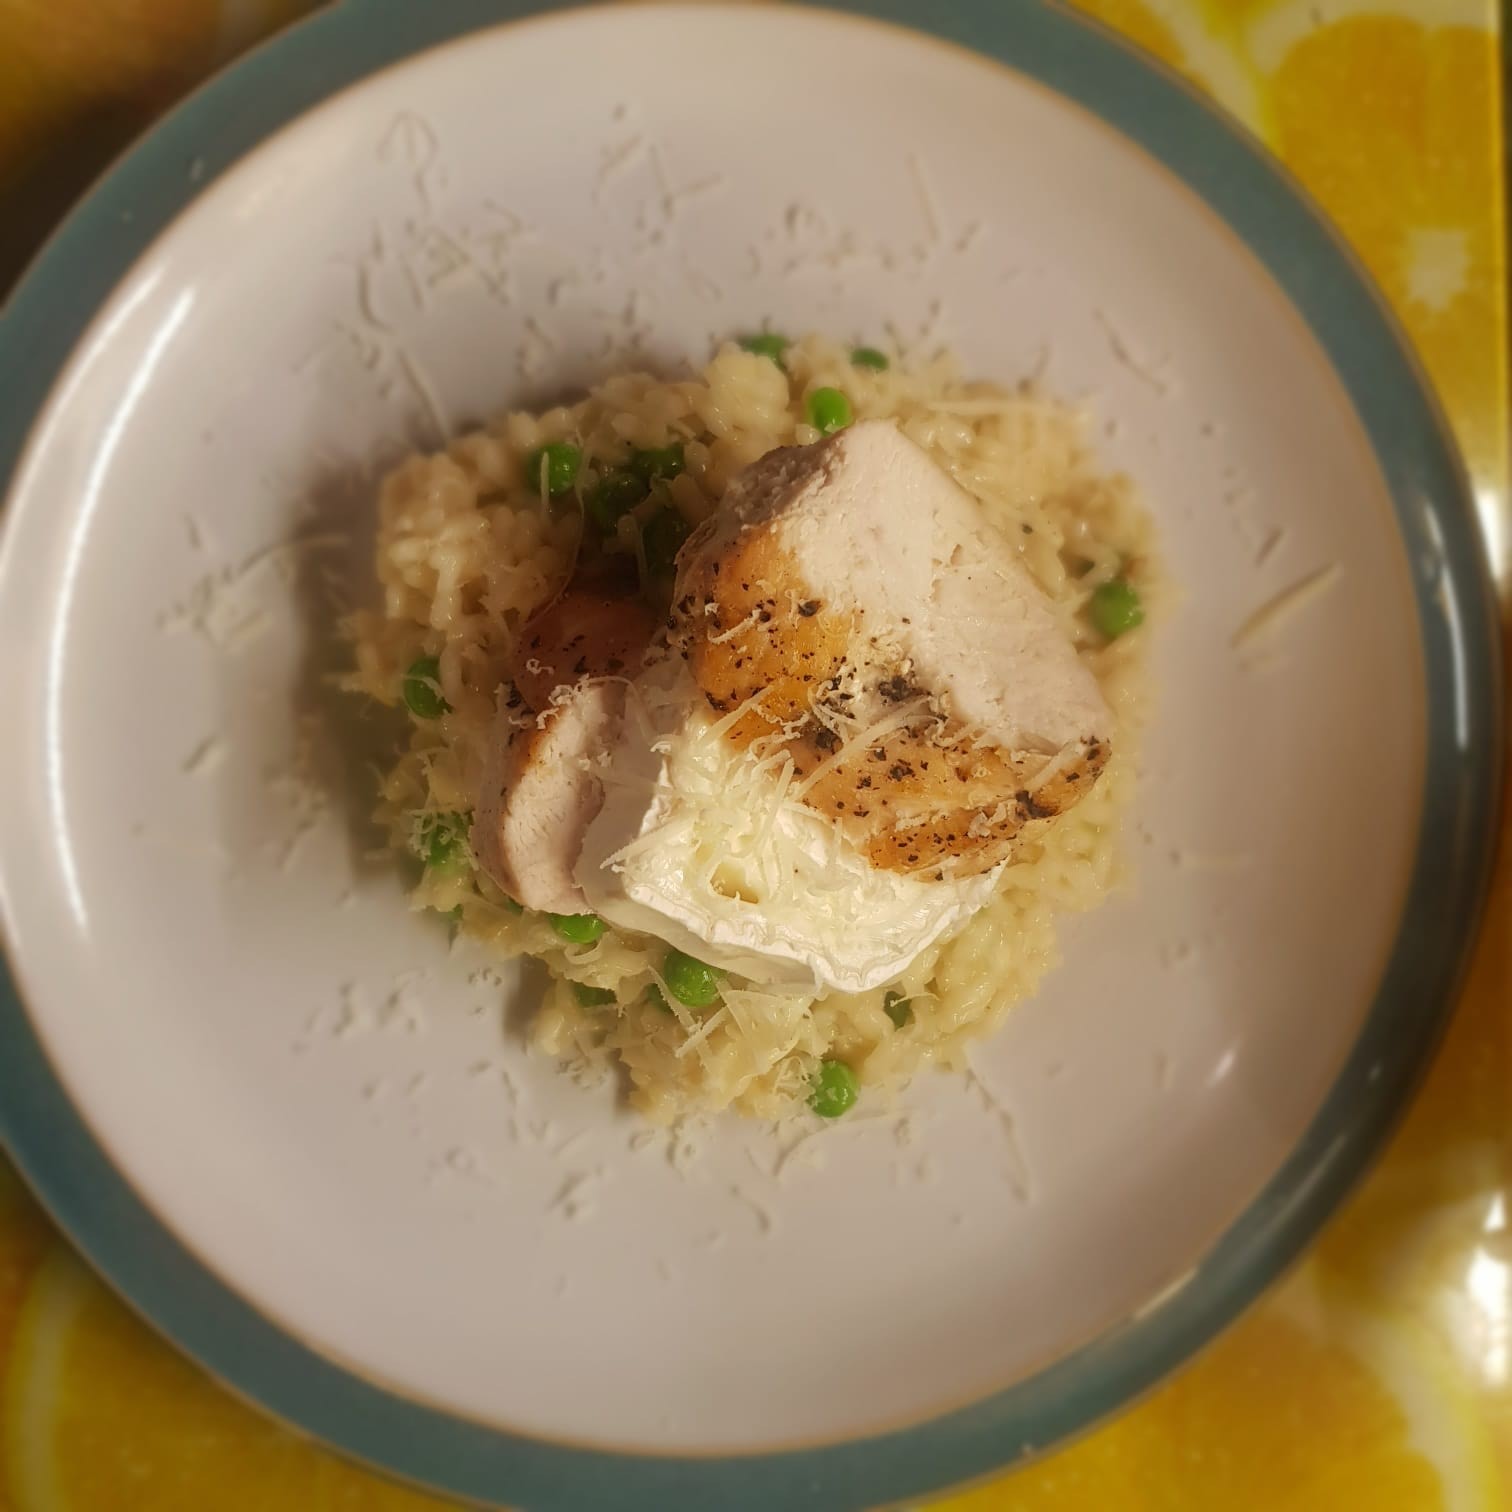 Pan fried chicken and risotto